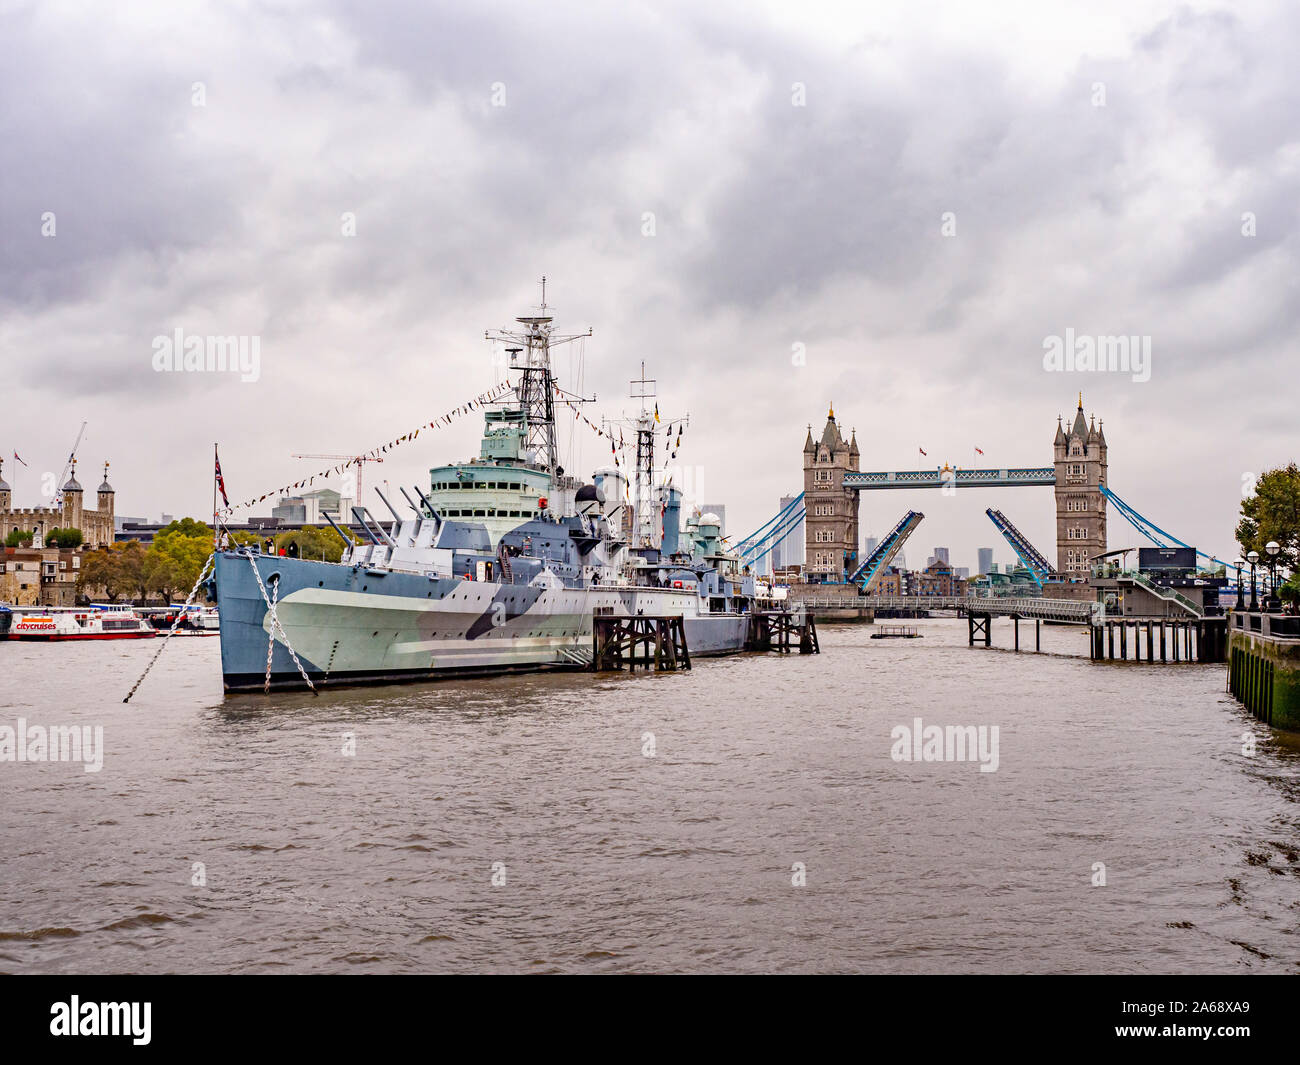 HMS Belfast, a Town-class light cruiser built for the Royal Navy. Now operated by the Imperial War Museum and permanently moored on the River Thames, Stock Photo